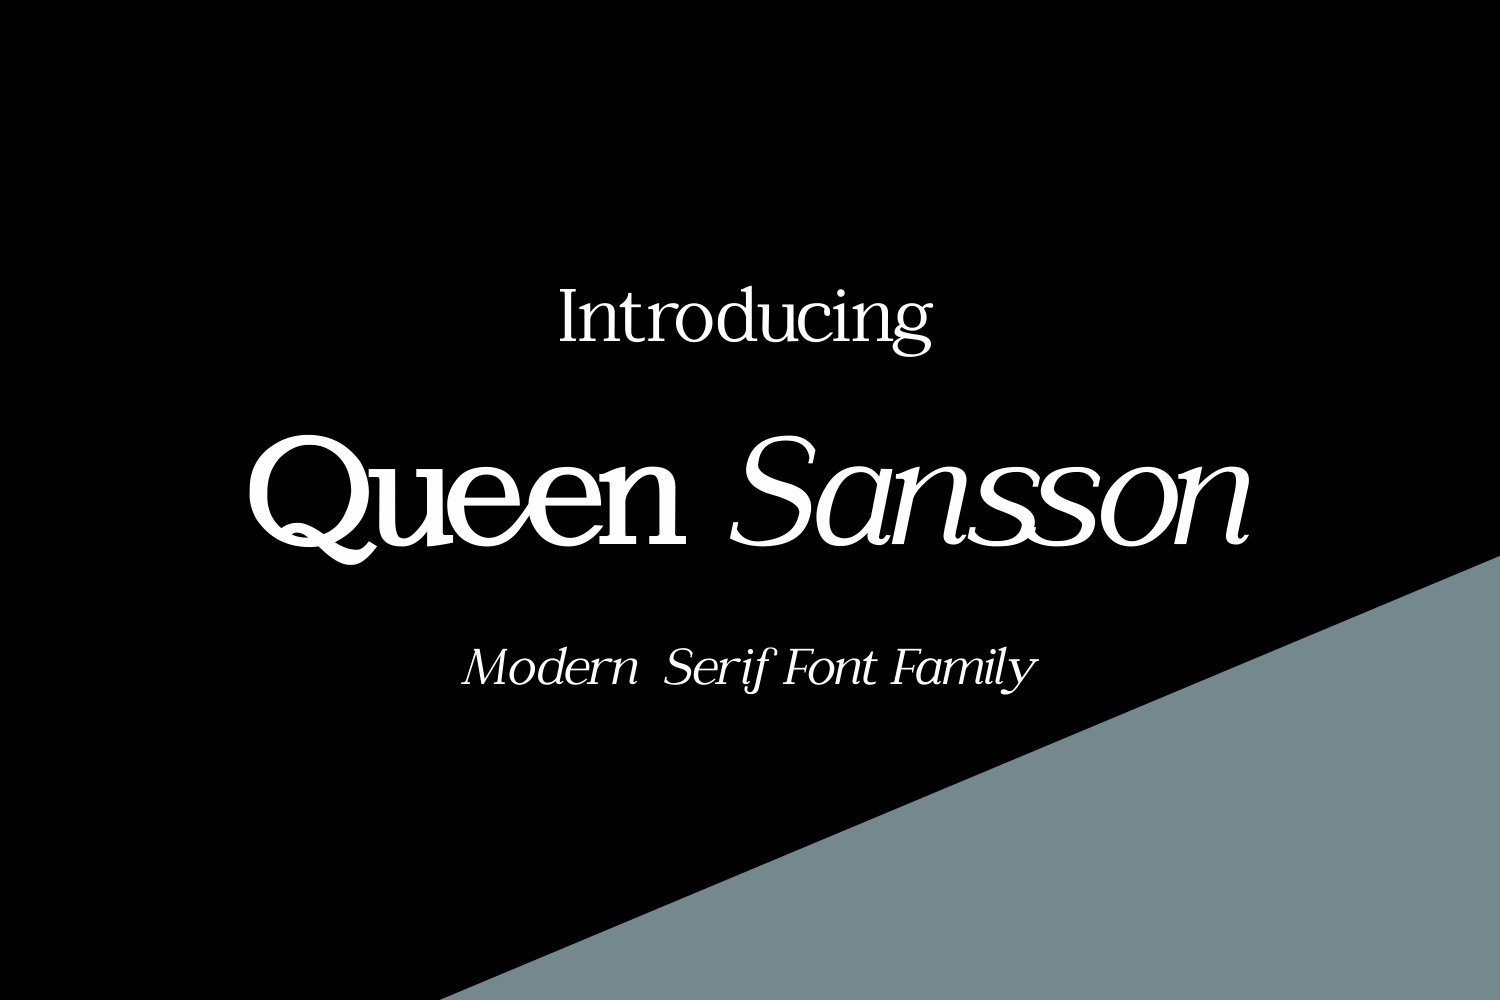 Queen Sanssoncover image.